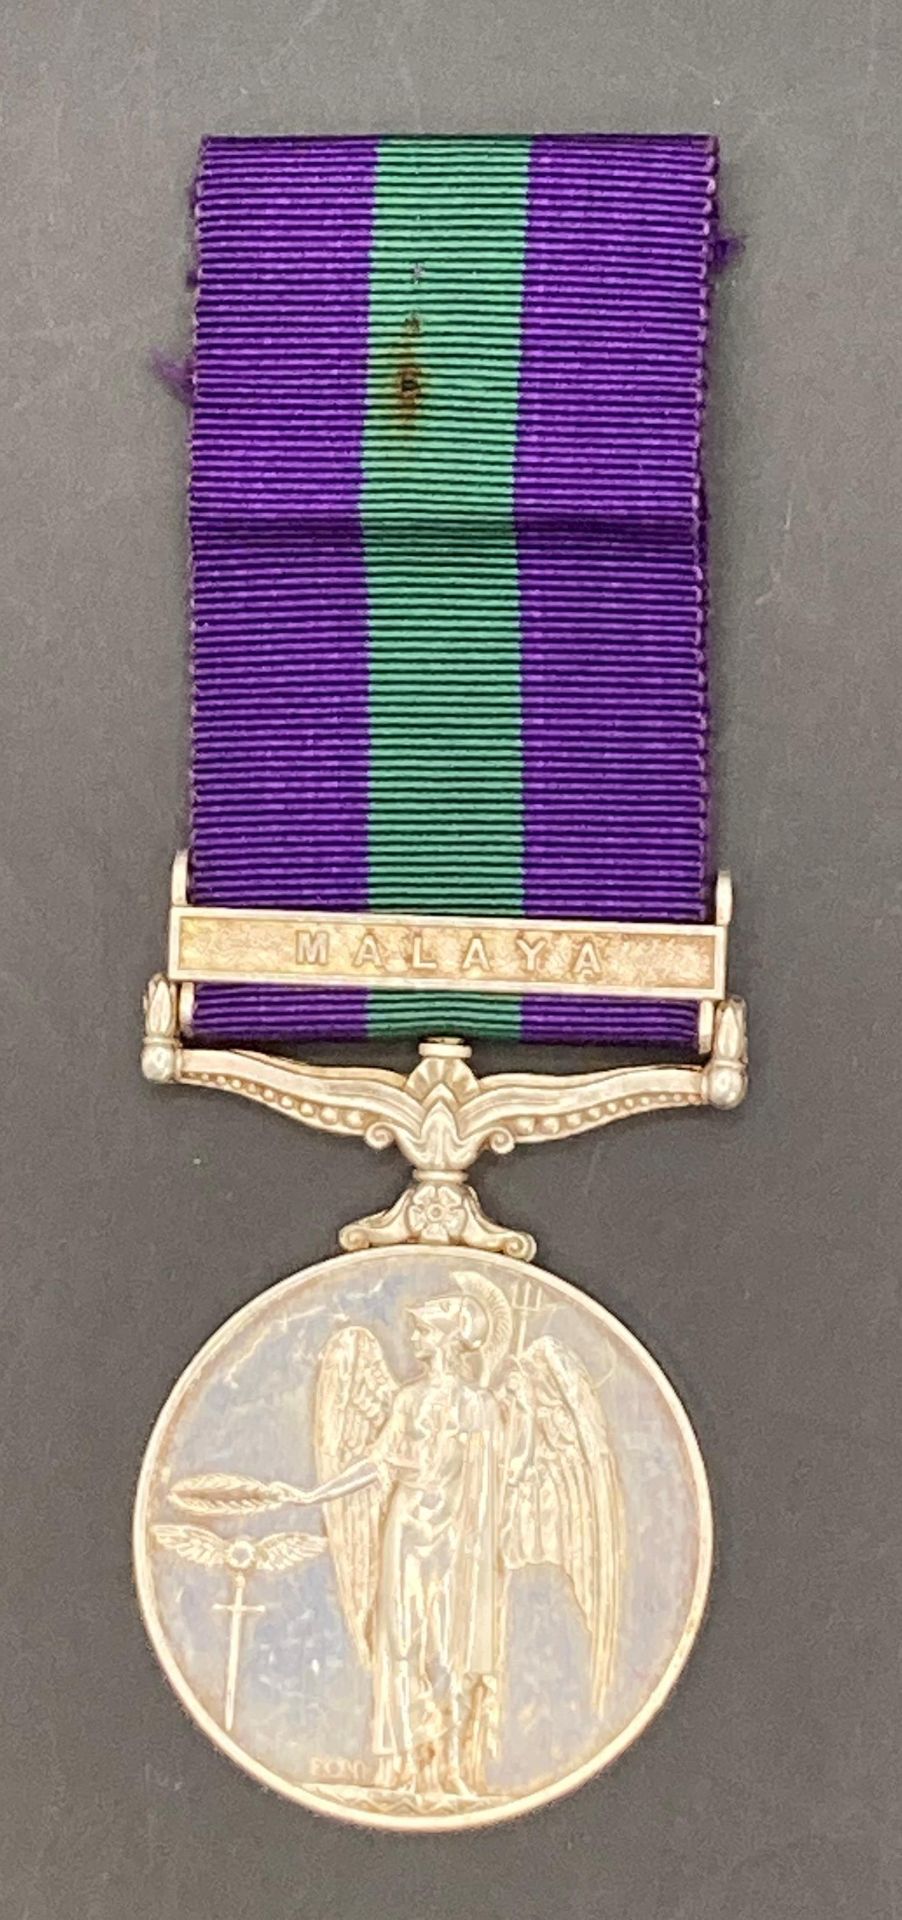 General Service Medal with Malaya clasp and ribbon (QEII D G BR Omn issue) to 22986108 Pte K - Image 2 of 3